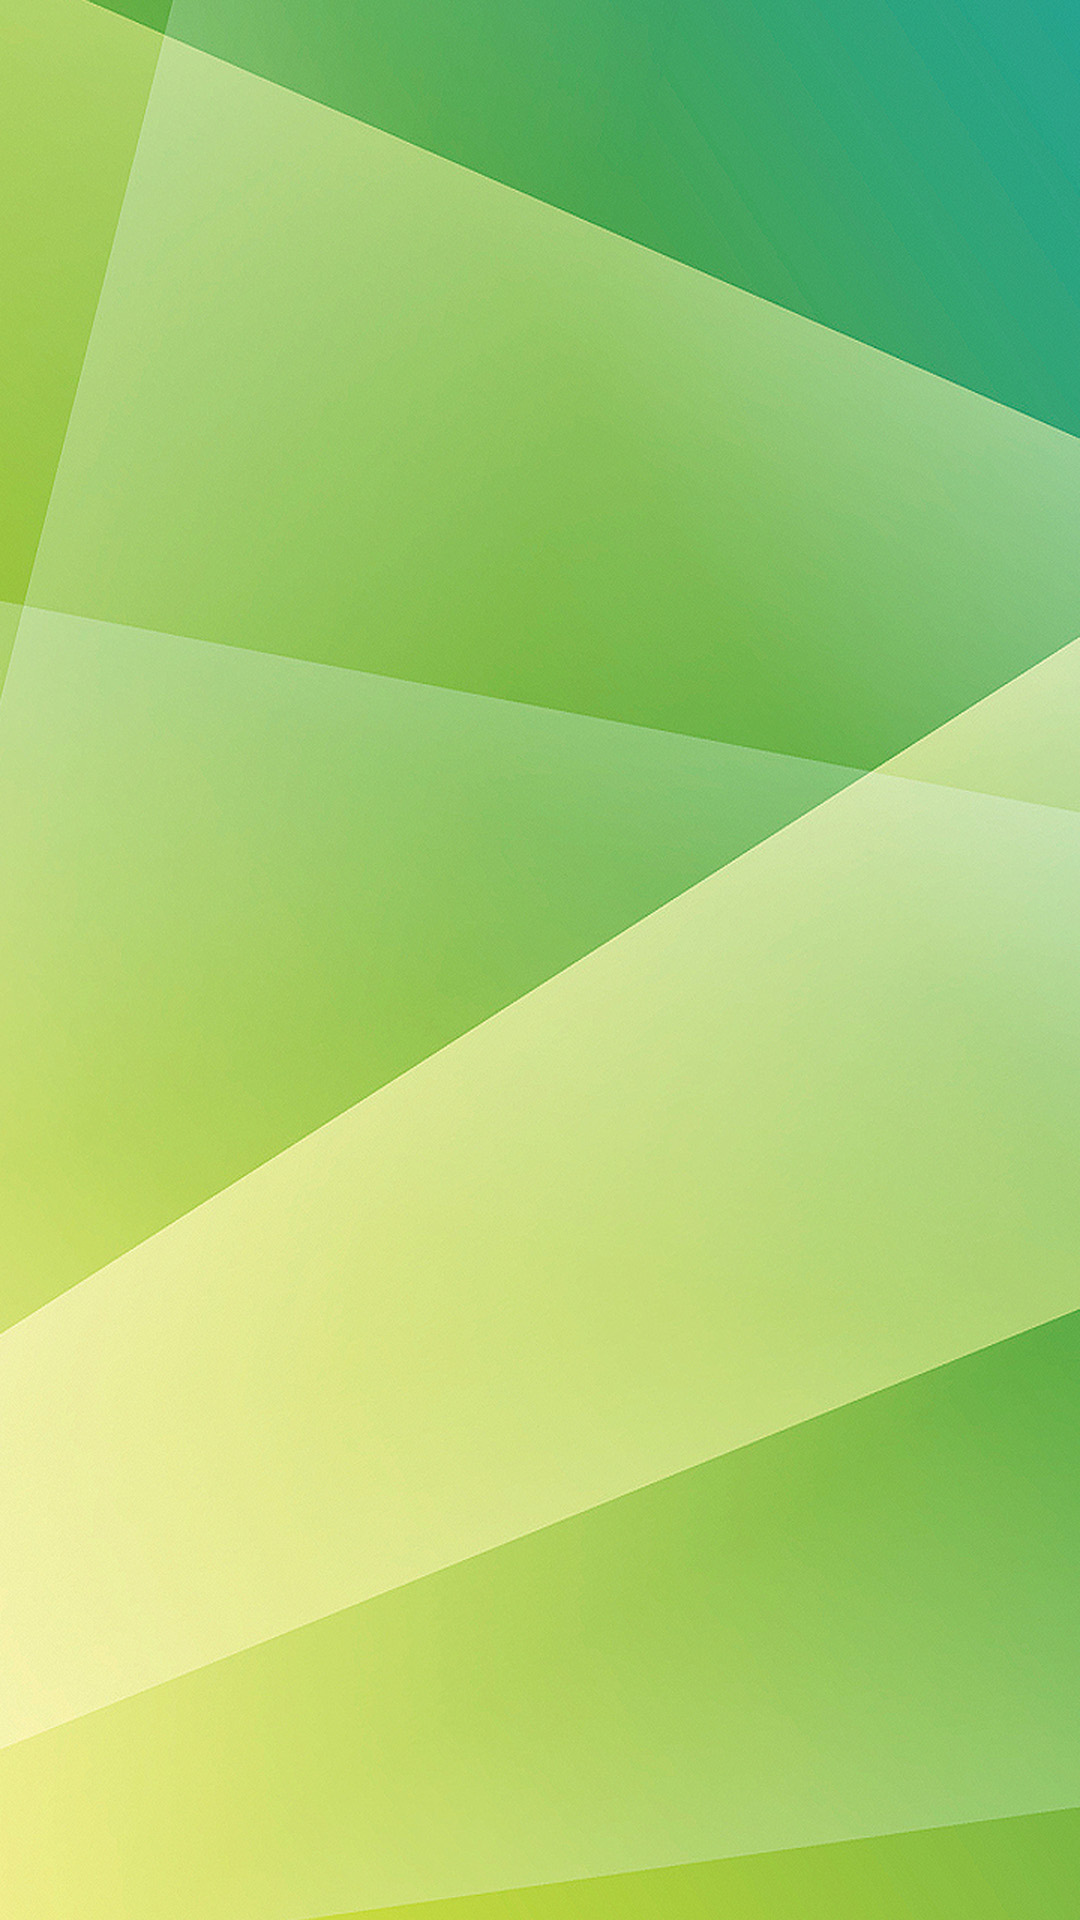 Geometry of the US Green Android wallpaper